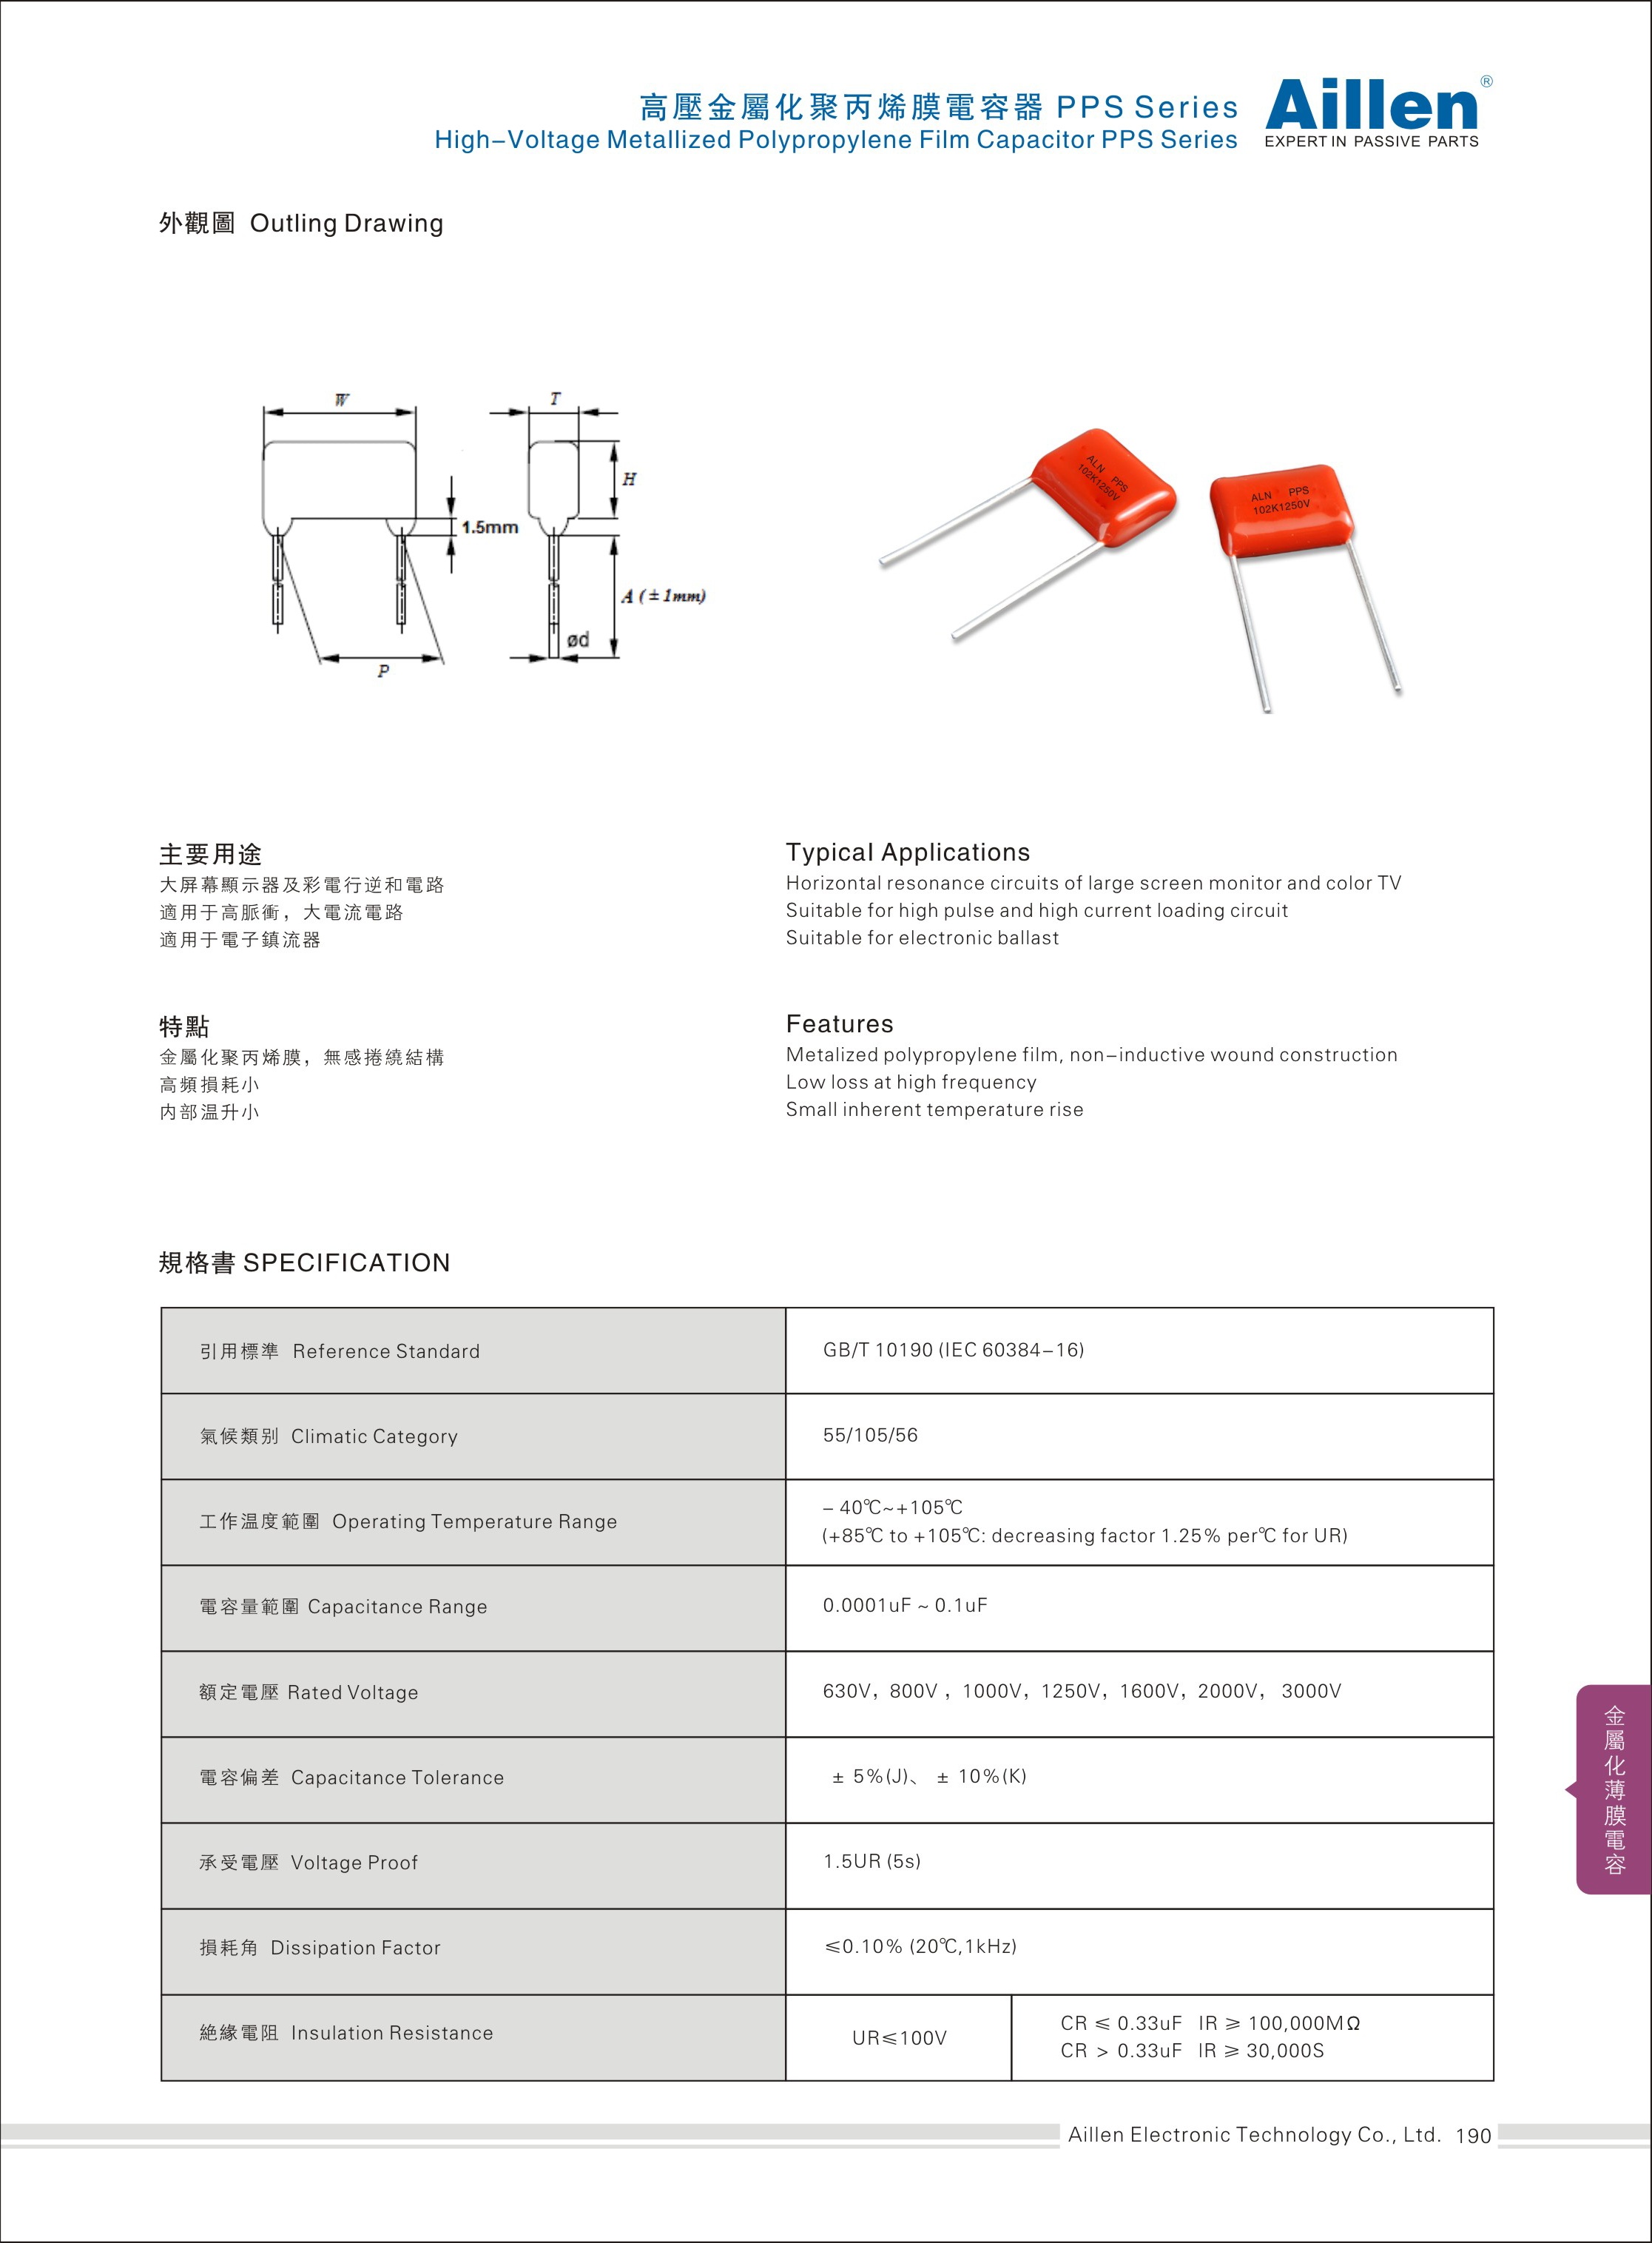 High-Voltage Metallized Polypropylene Film Capacitor PPS Series